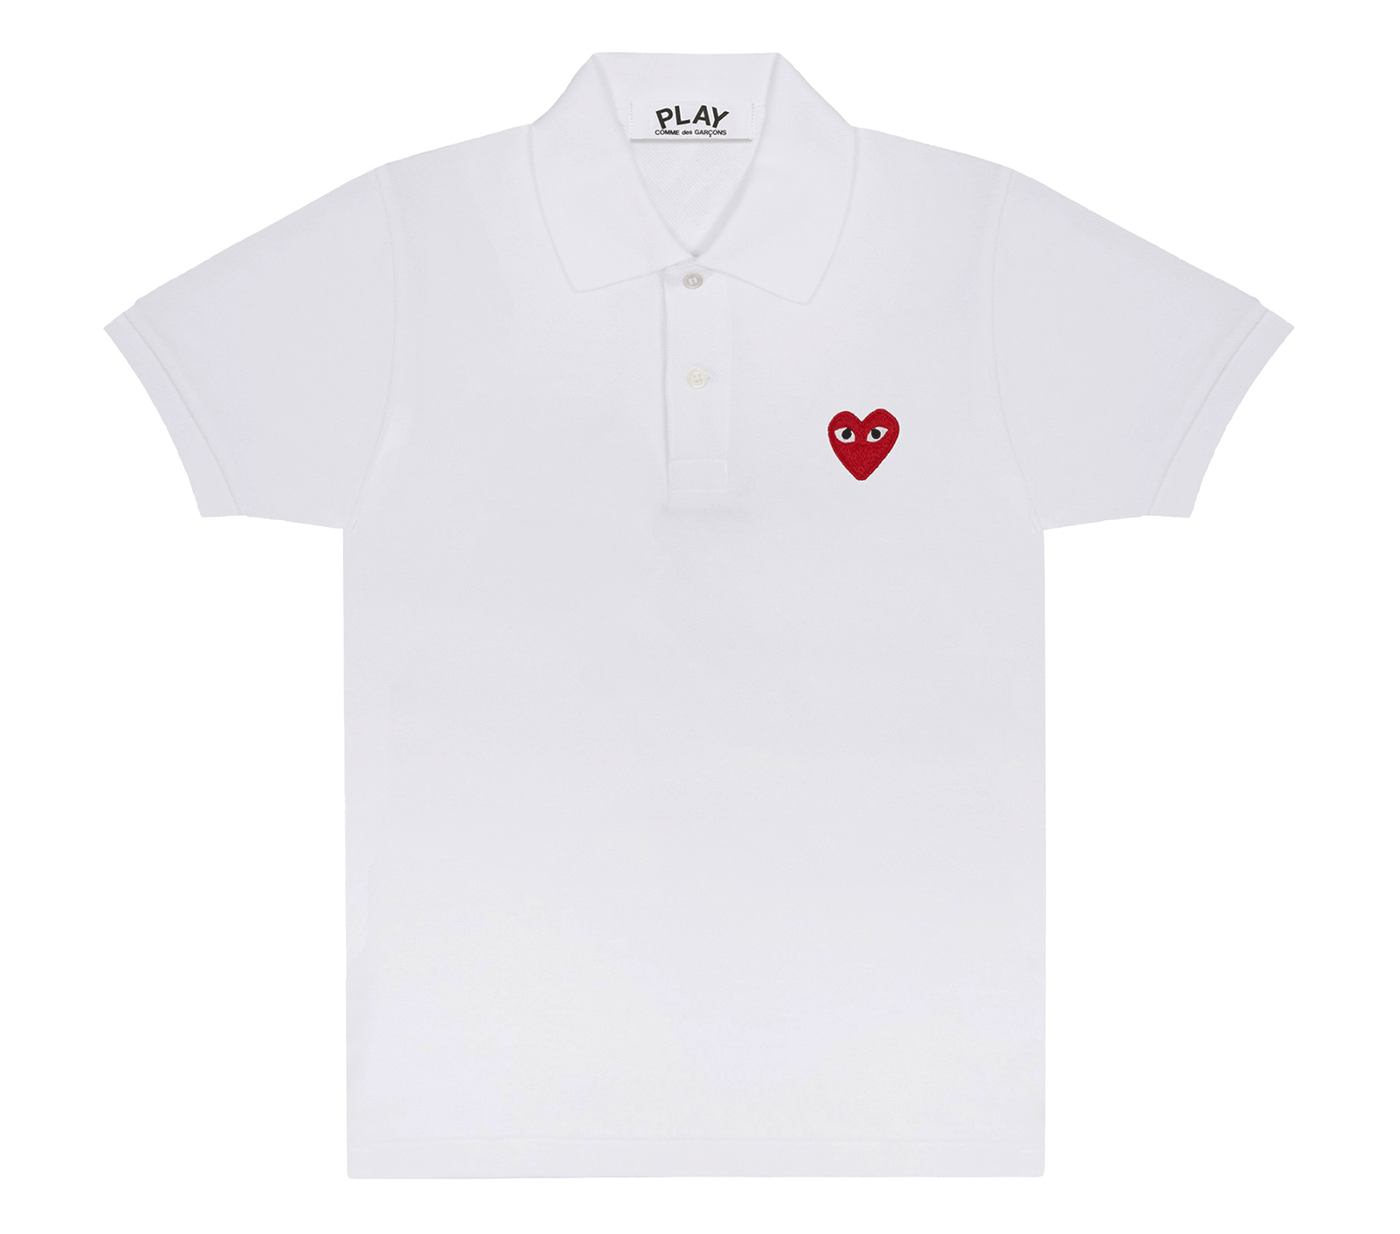    Comme-des-Garcons-Play-Polo-Shirt-with-Red-Emblem-Women-White-1